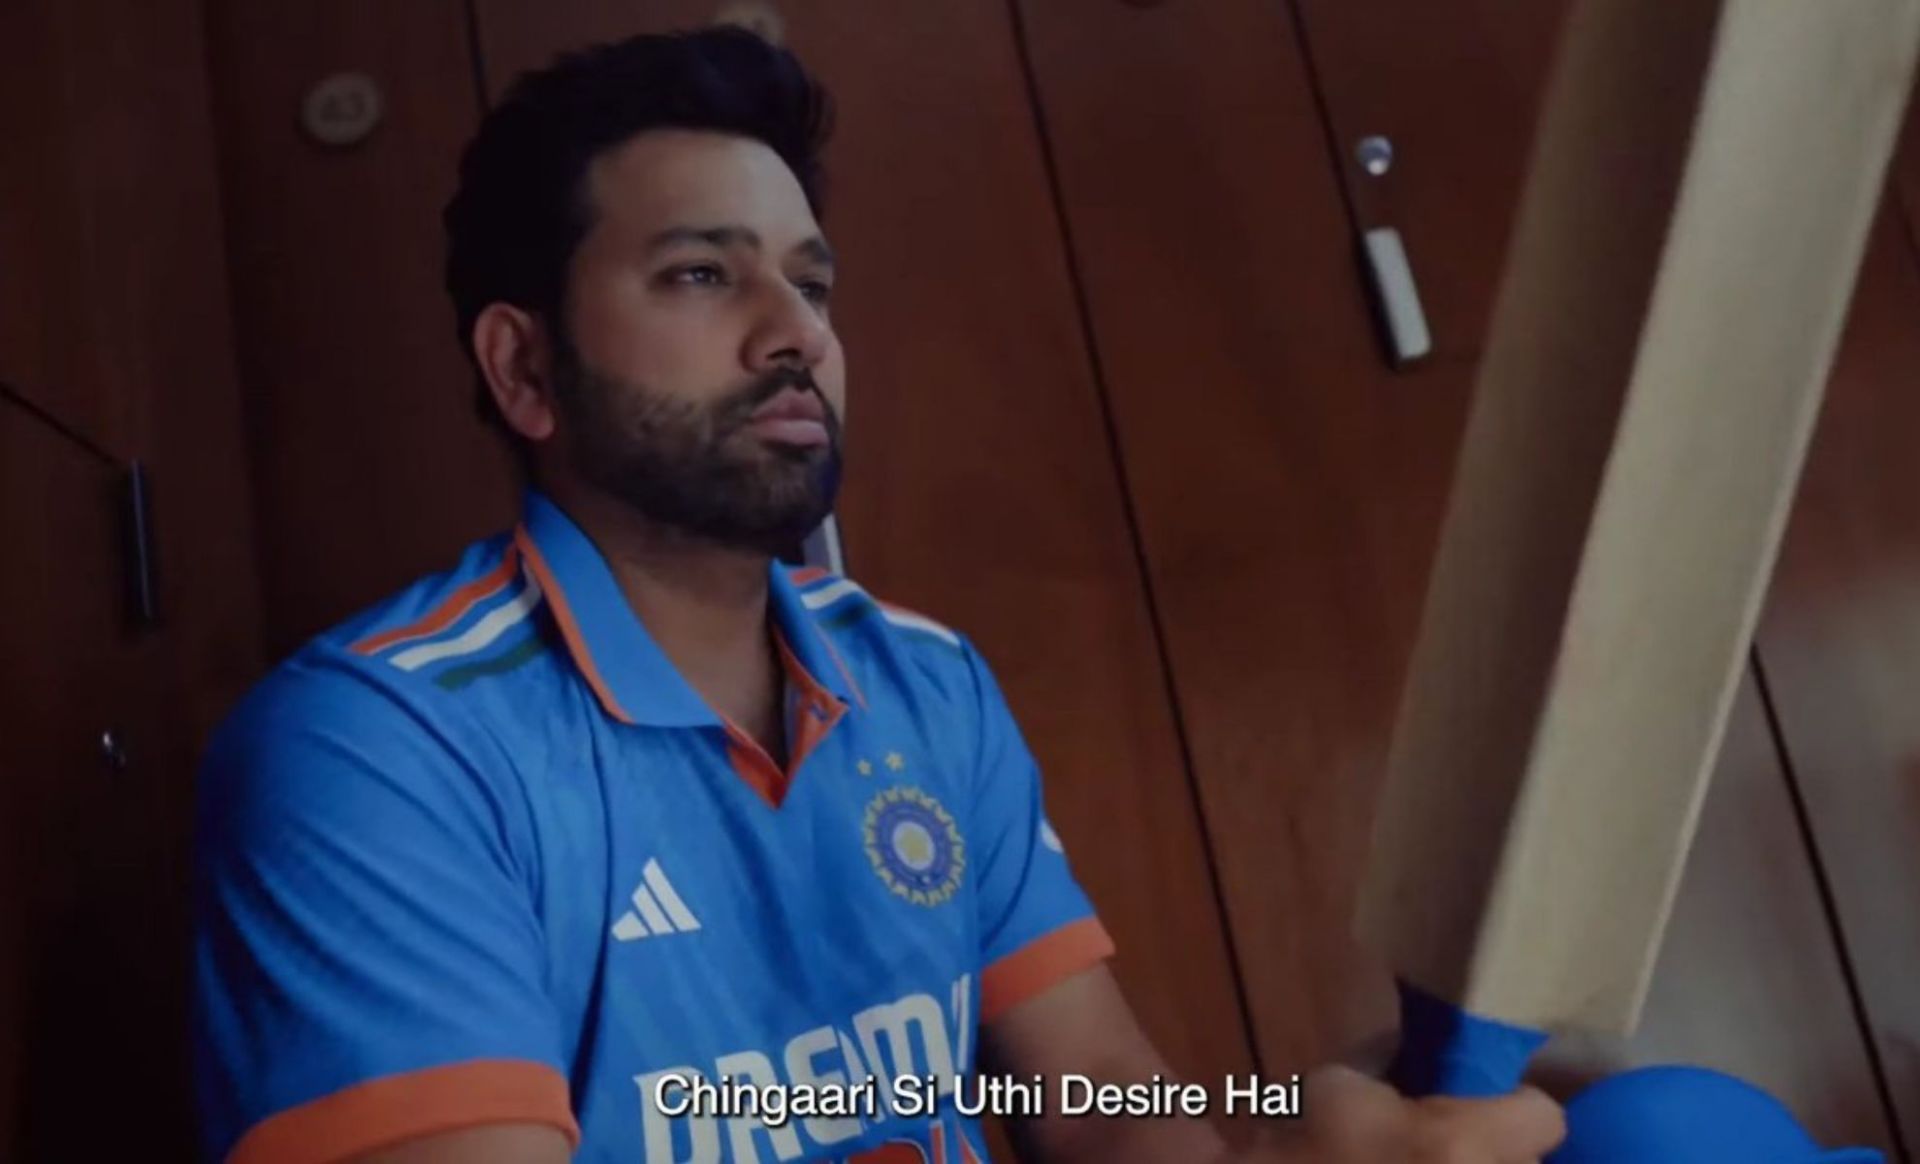 Rohit Sharma donned the Indian jersey ahead of the 2023 World Cup.